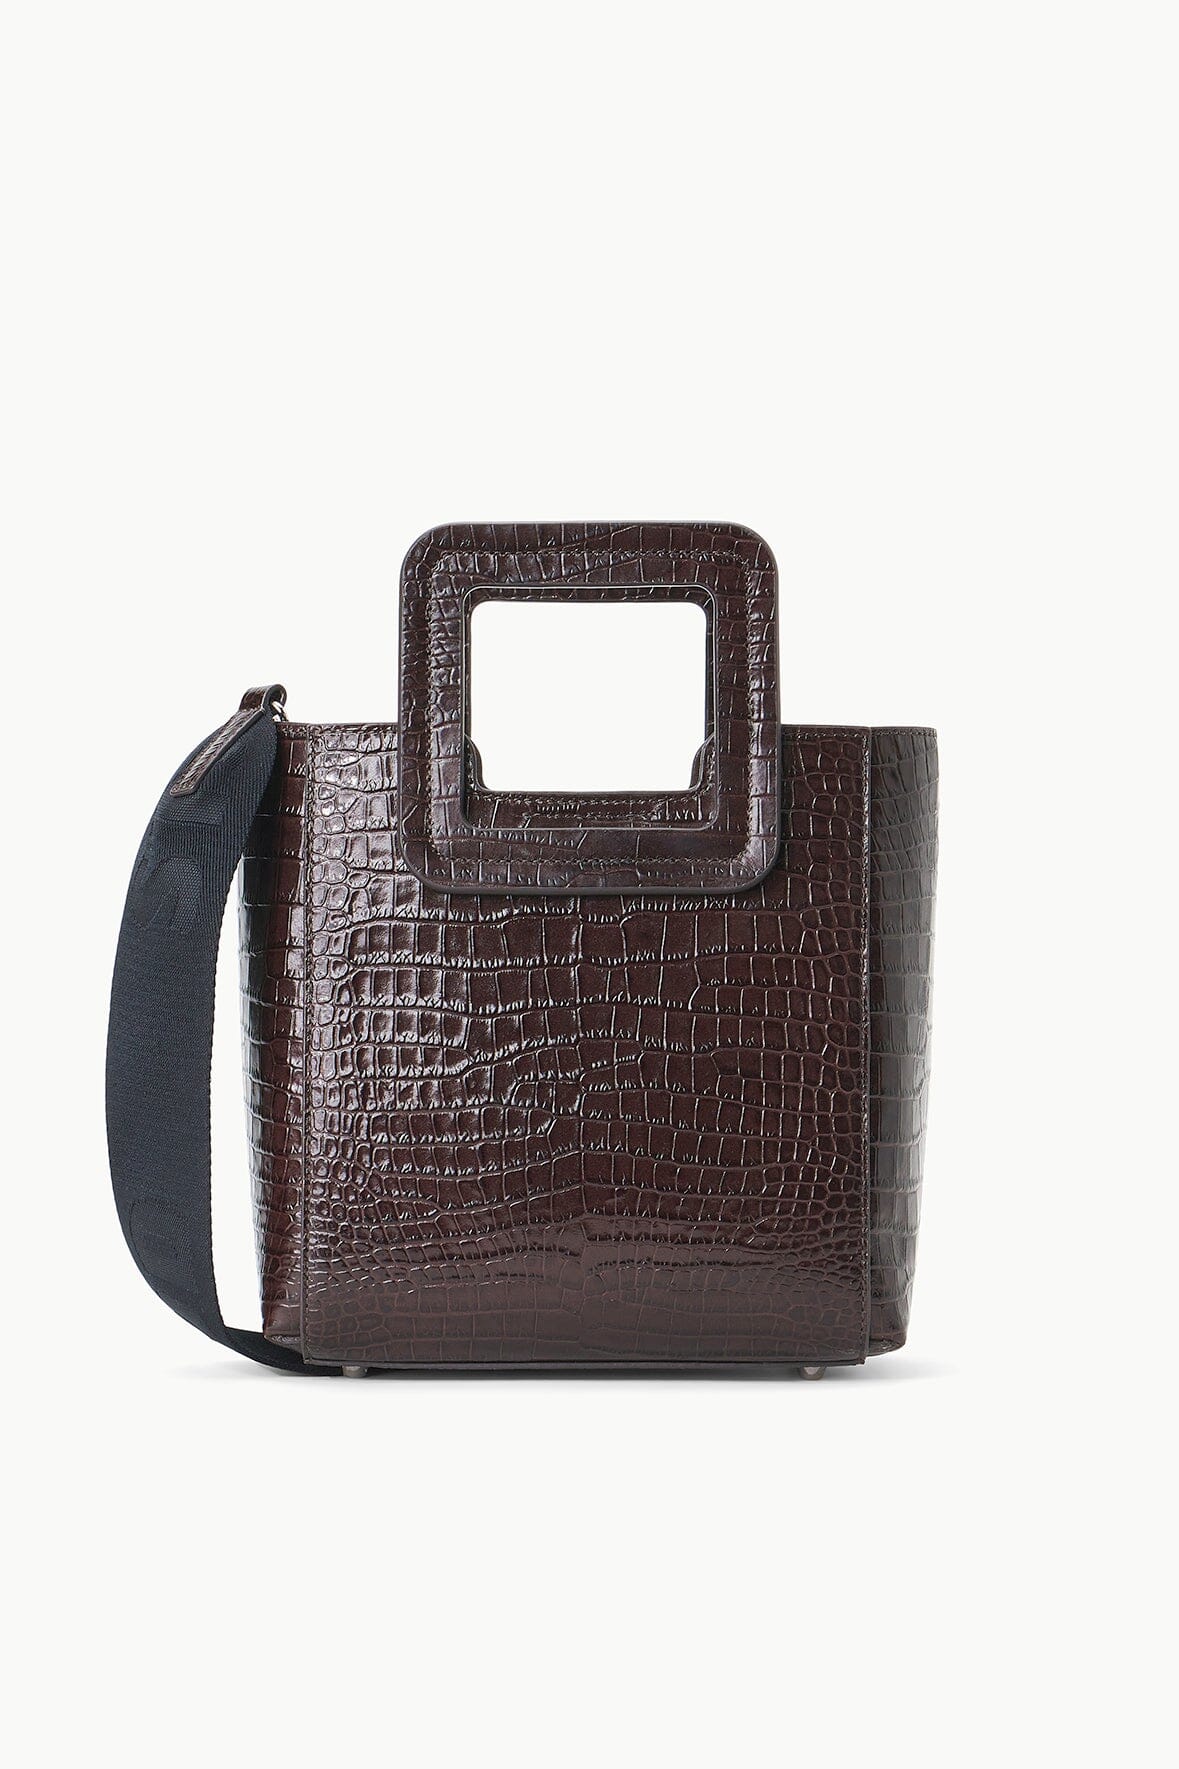 STAUD, Mini Shirley Leather Bag for Female in Walnut Ostrich Embossed